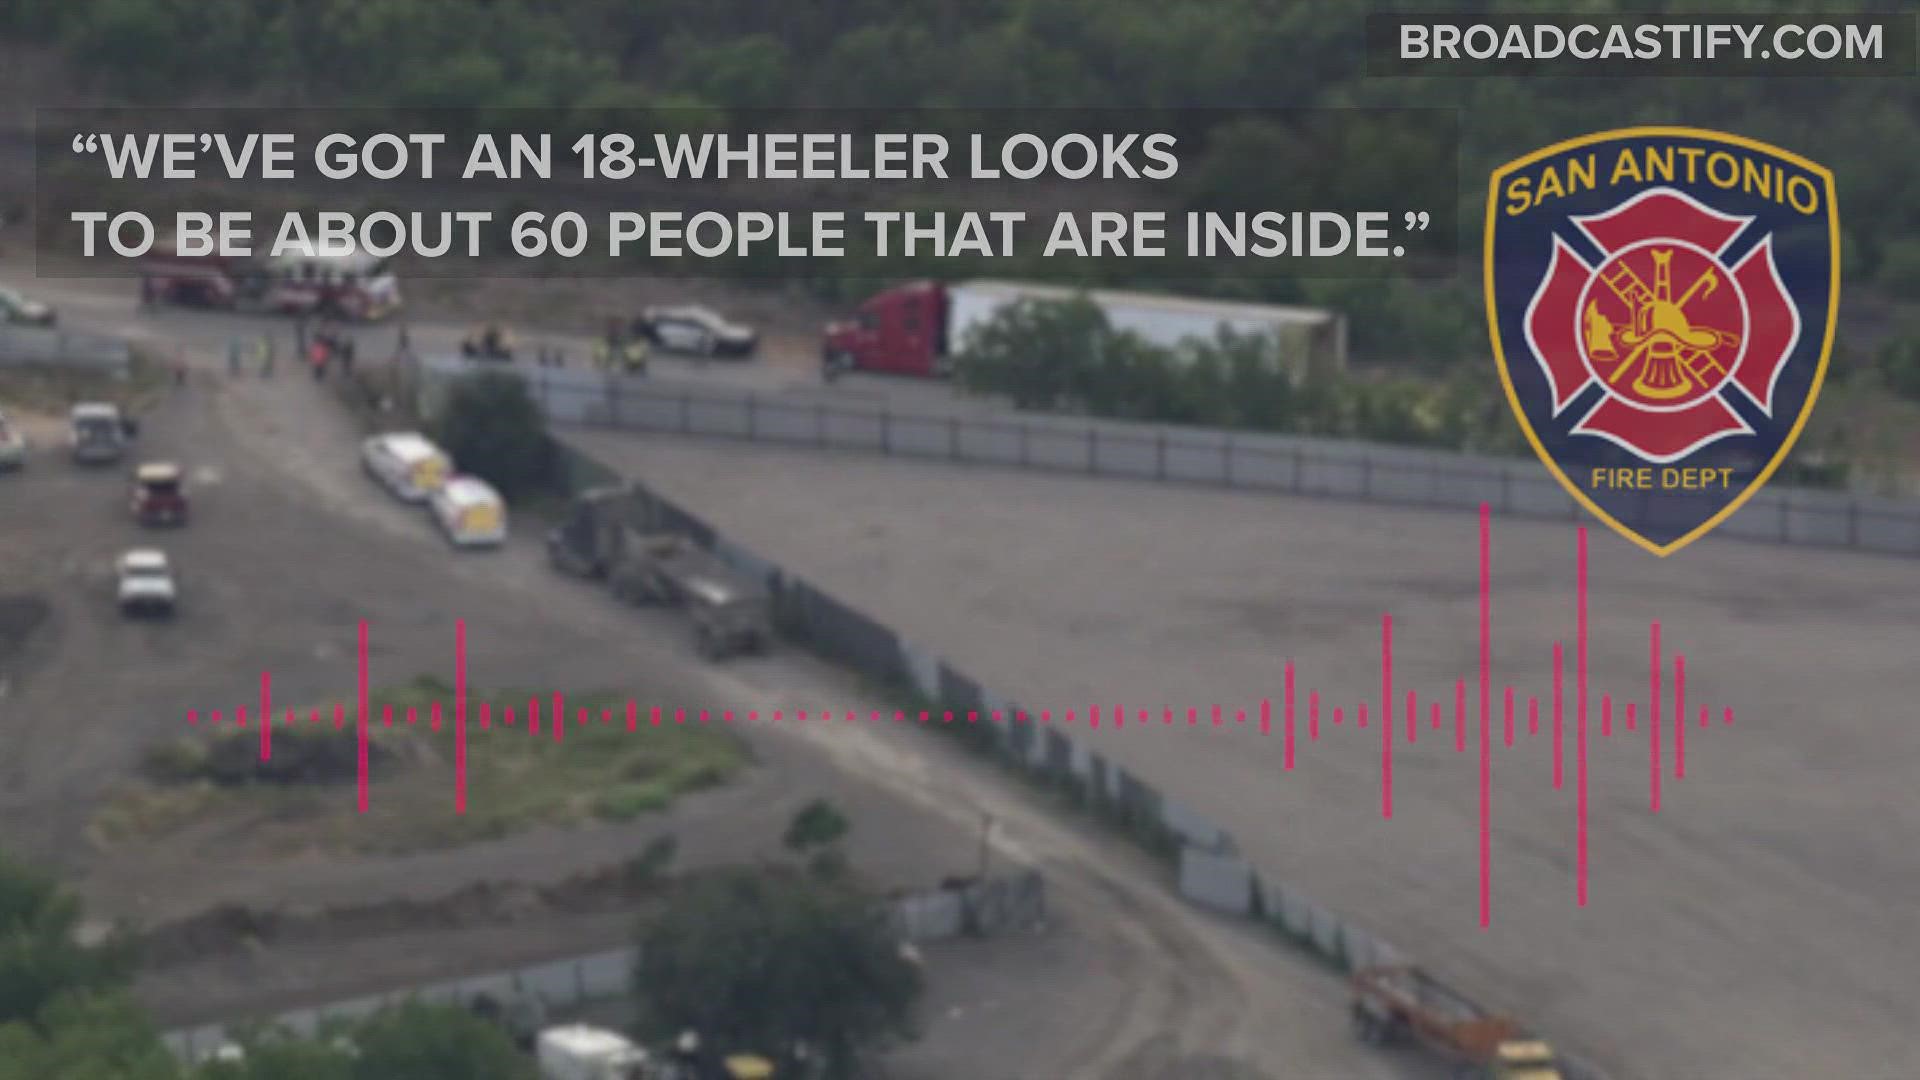 Officials said 51 migrants were found dead in a non-working, refrigerated semi-truck. Radio transmissions from first responders shed light on the discovery.